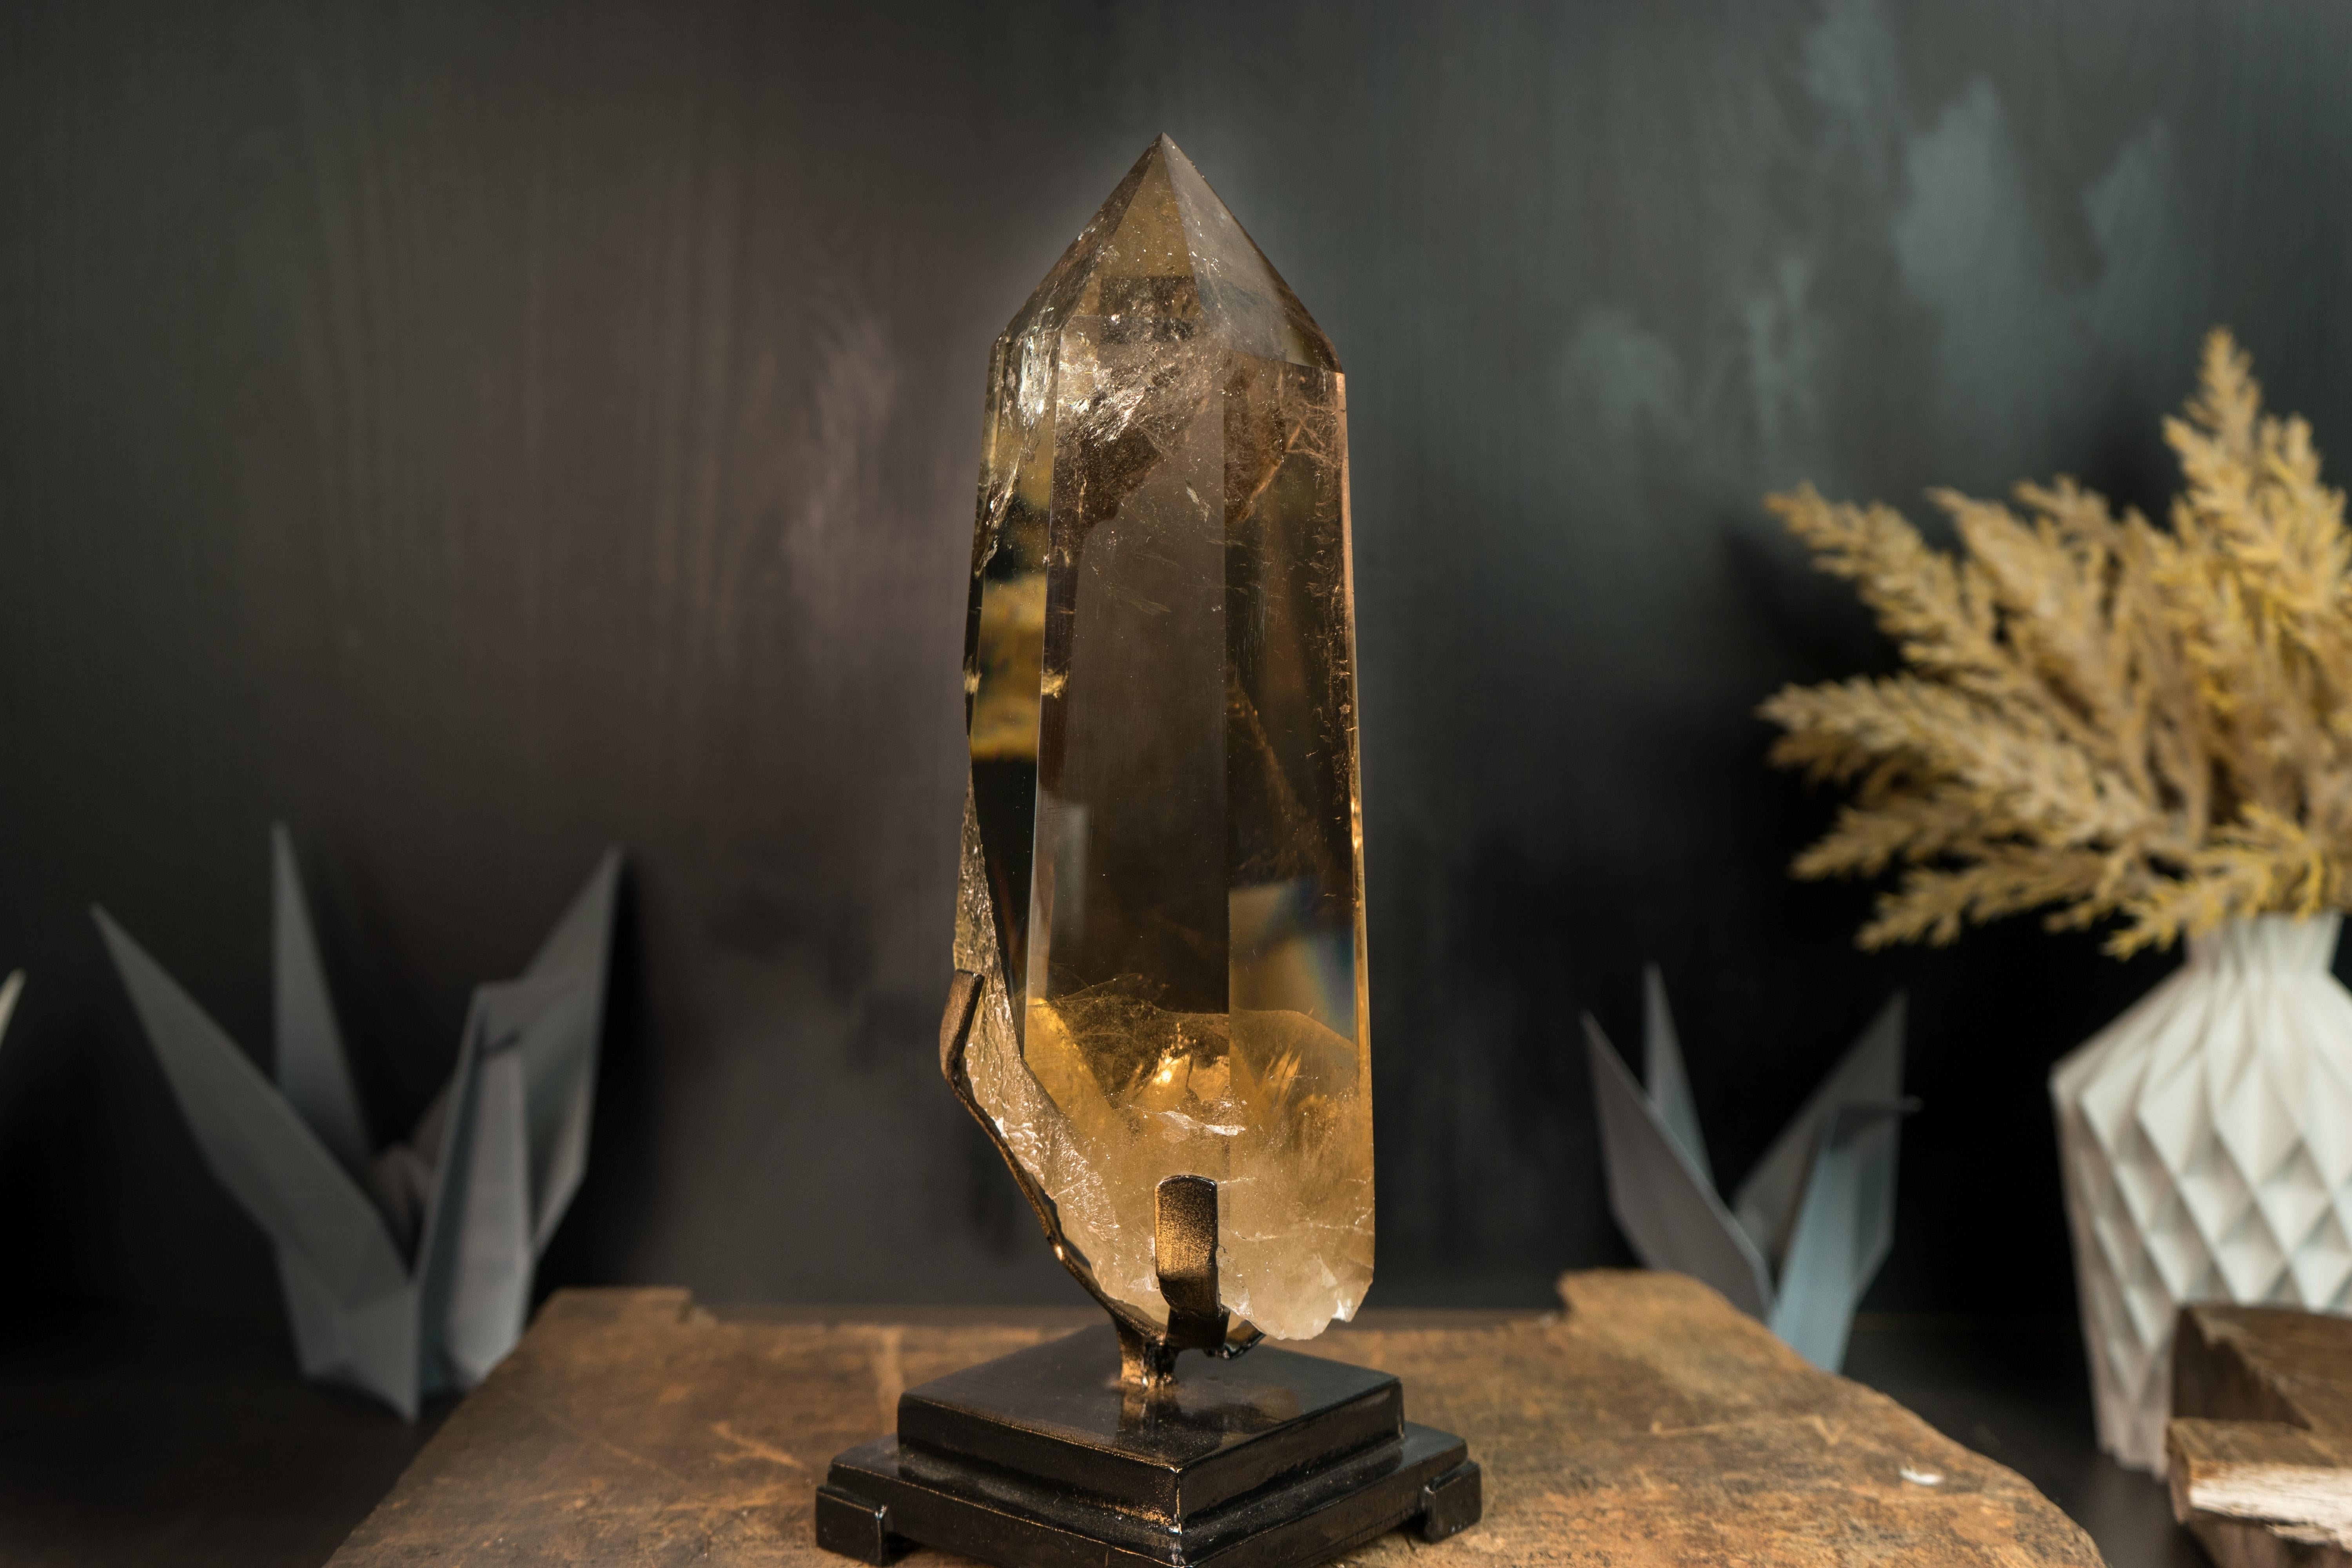 Unmatched in beauty, this Raw, Natural Citrine boasts a gorgeous aesthetic with world-class color in a near-perfect glass-clear interior. A Citrine Tower that makes a statement, this is the perfect specimen for those seeking the ultimate expression